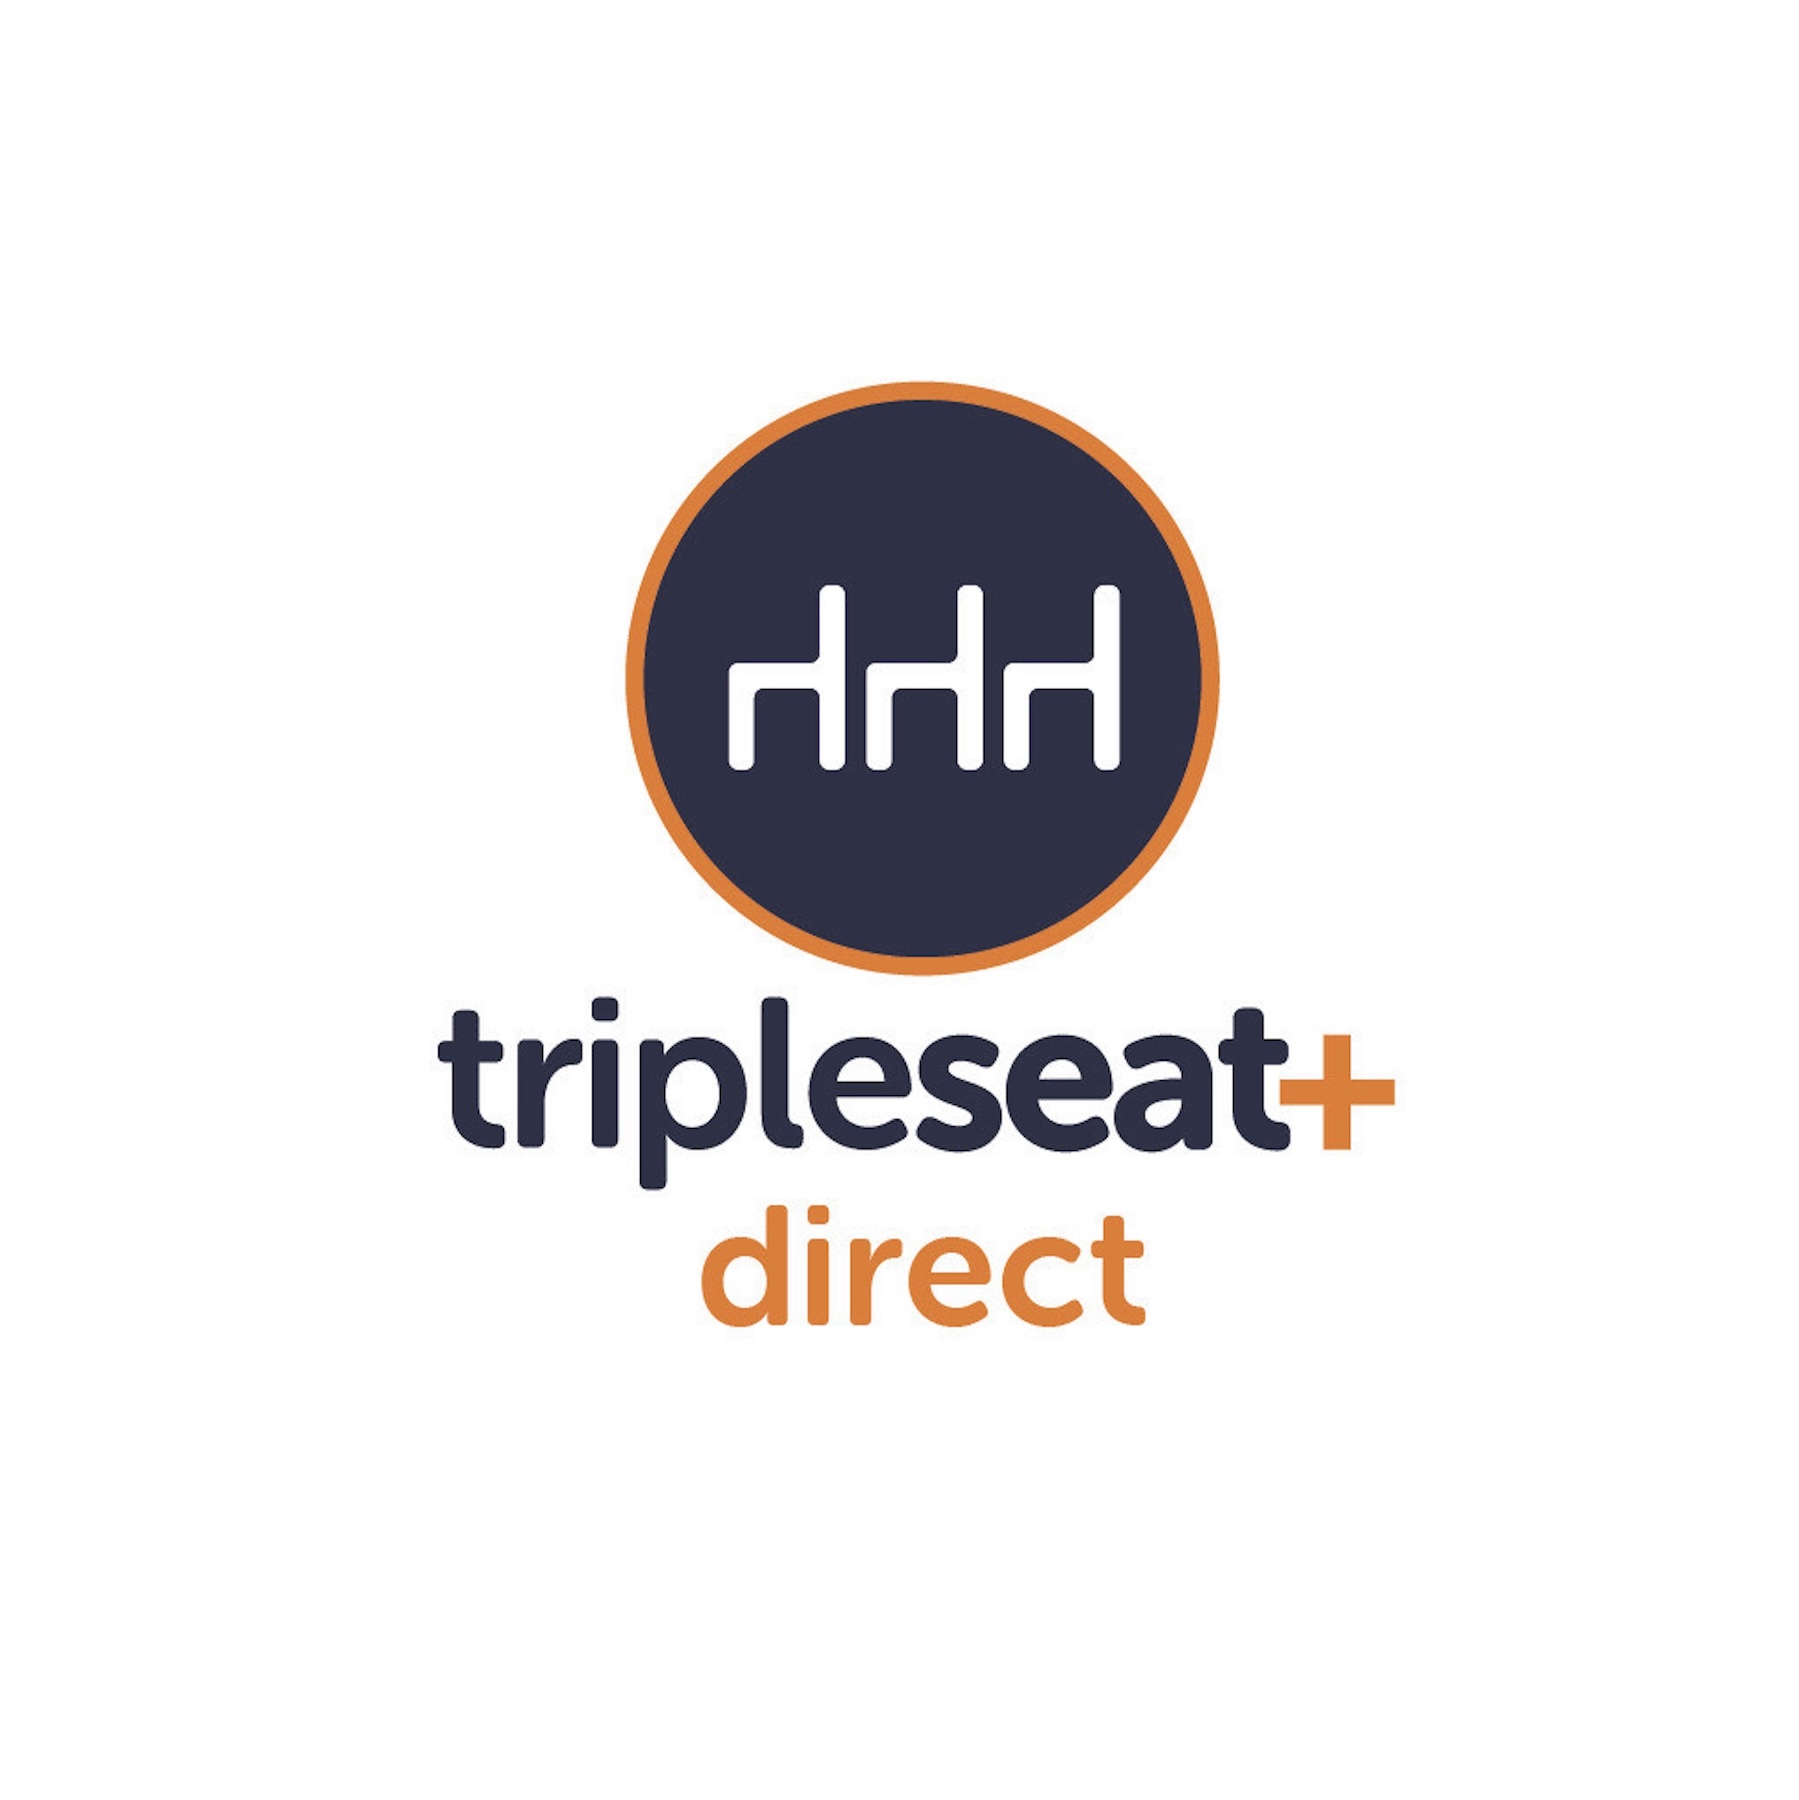  Tripleseat Solves The Large Party Reservation Problem for Restaurants and Their Guests 